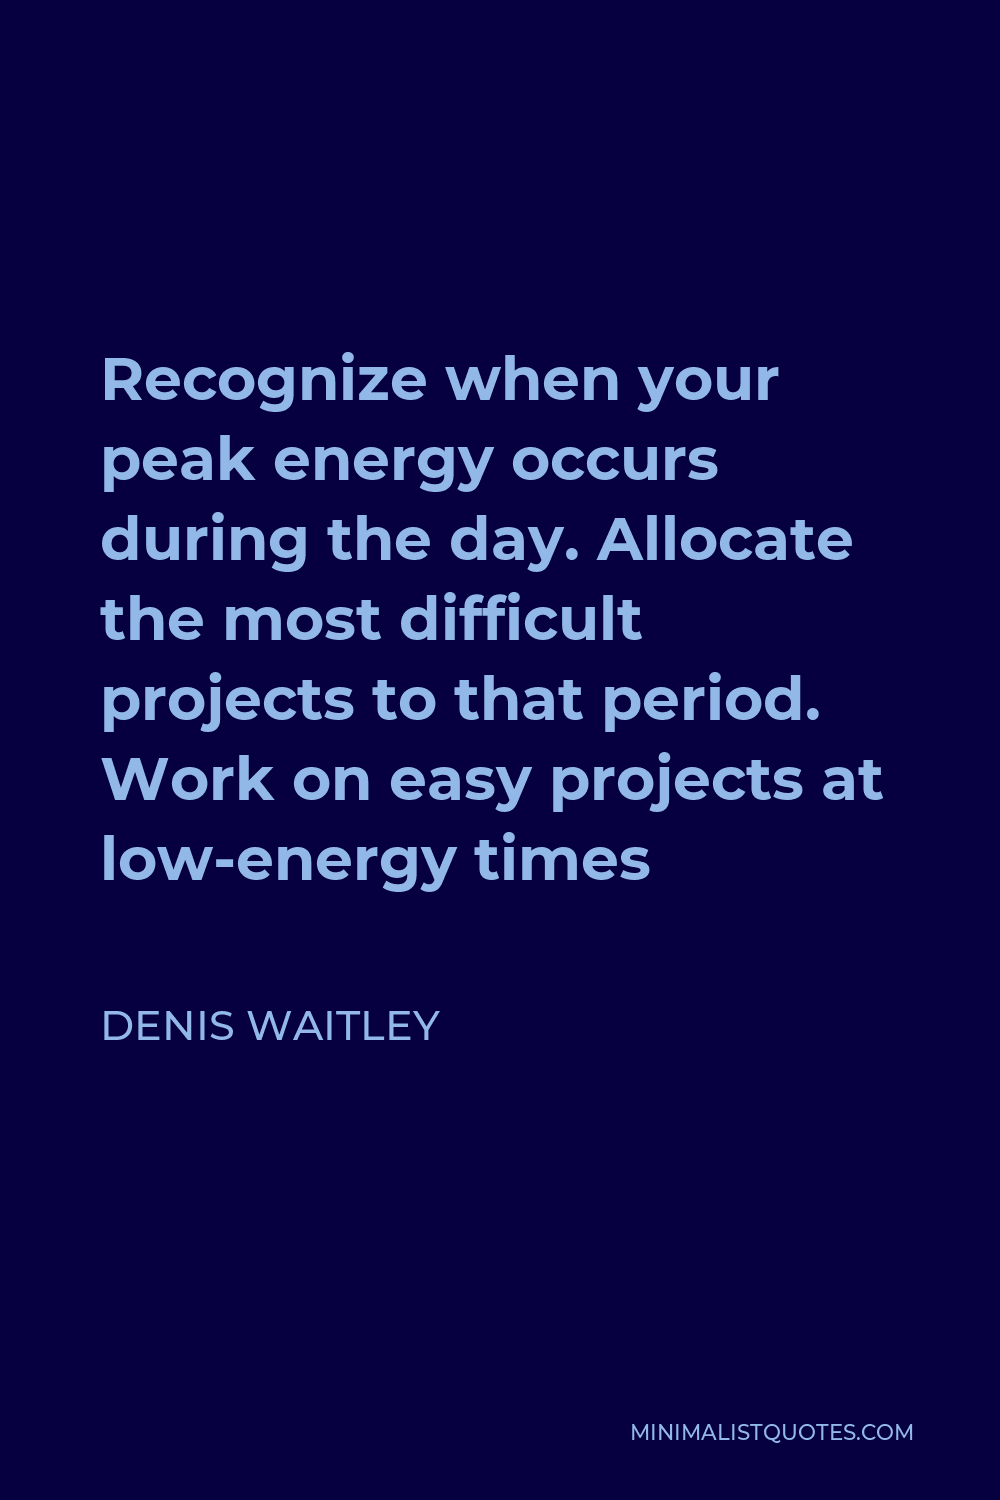 Denis Waitley Quote - Recognize when your peak energy occurs during the day. Allocate the most difficult projects to that period. Work on easy projects at low-energy times